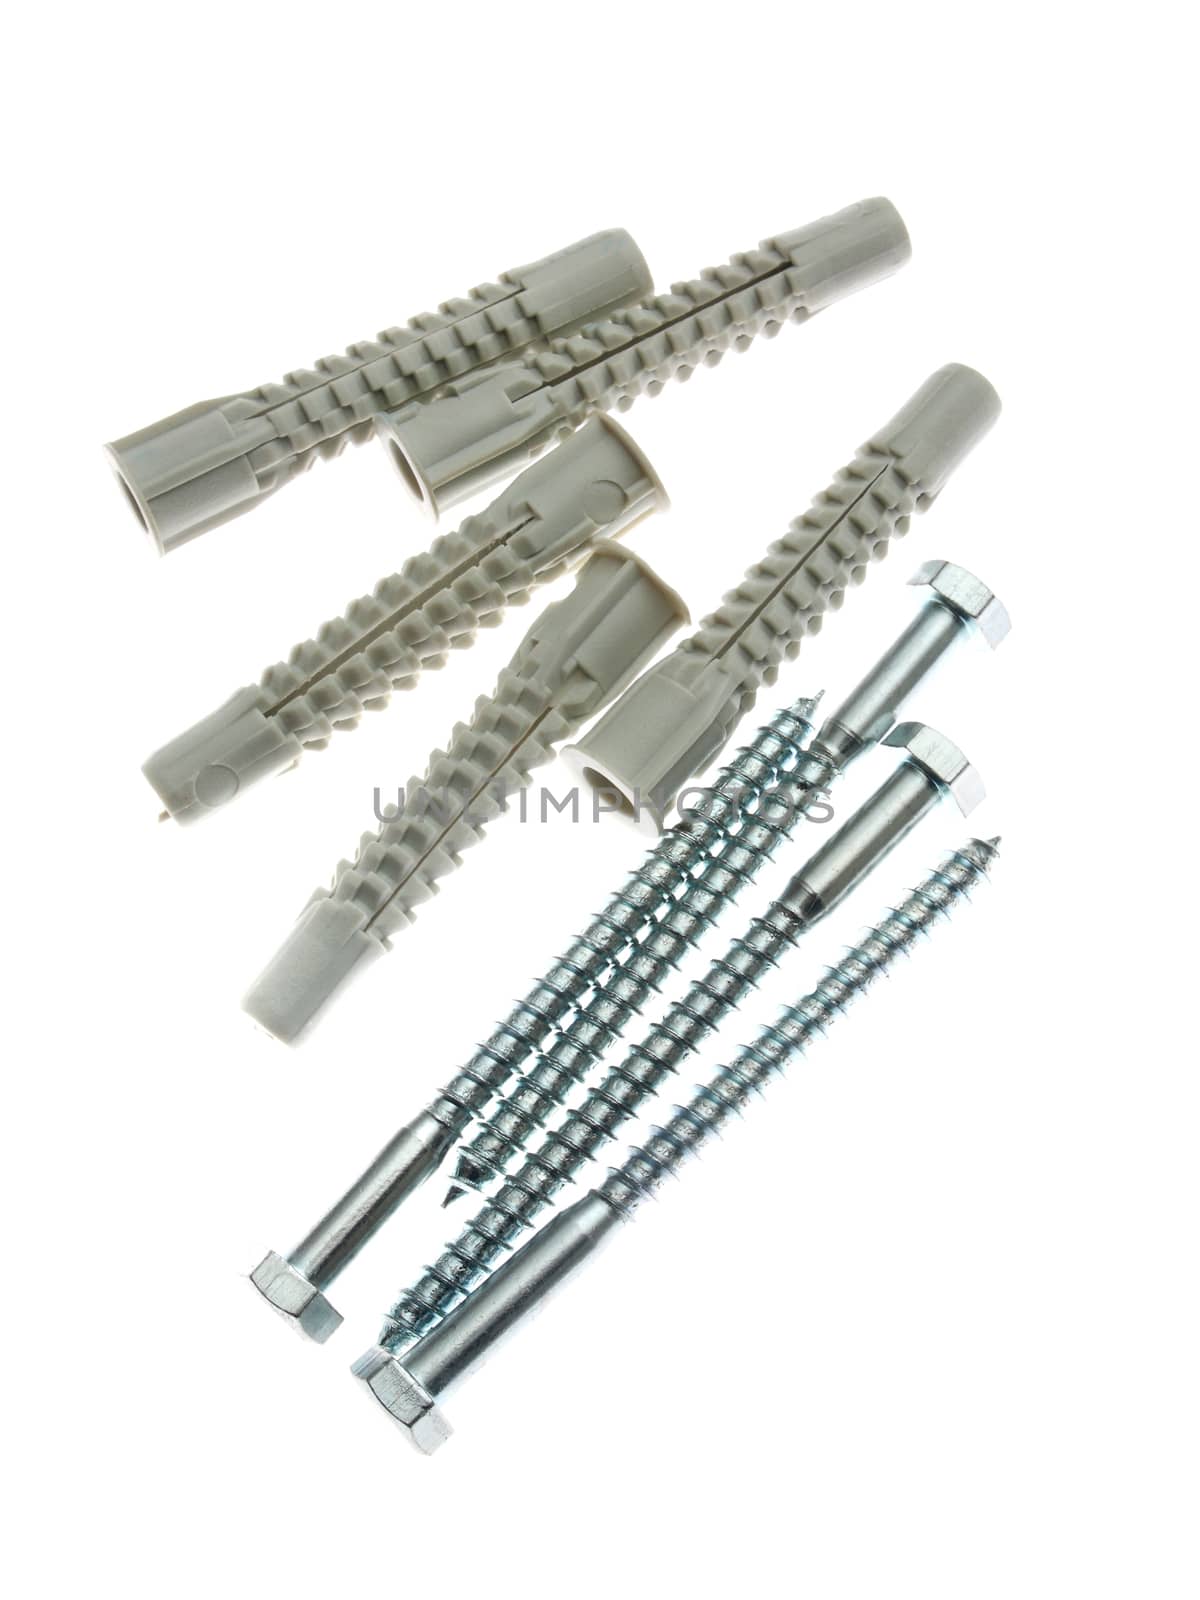 Rawlplugs and screws isolated in white